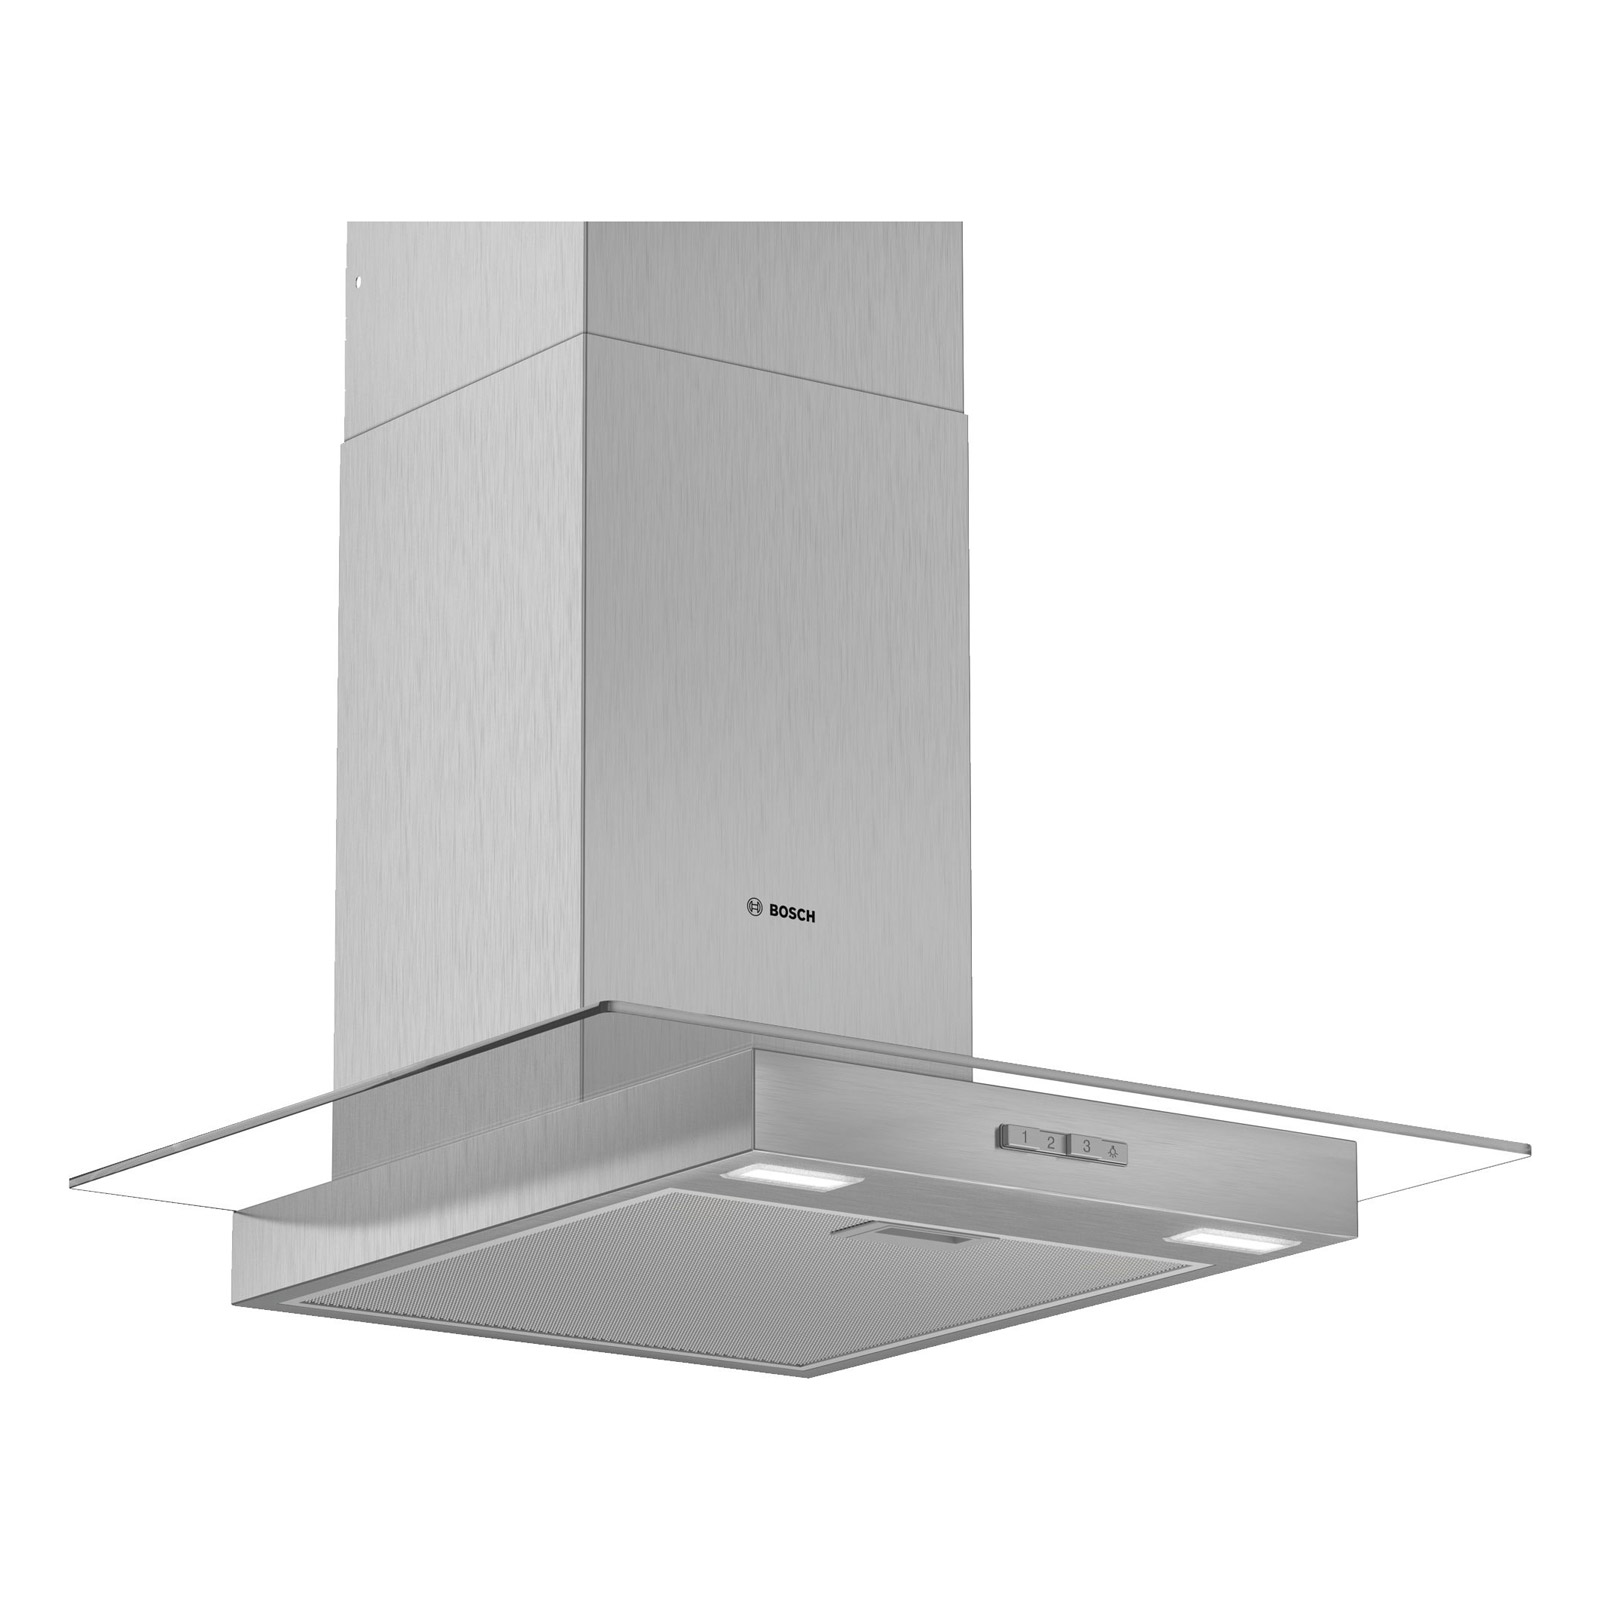 Image of Bosch DWG64BC50B Series 2 60cm Flat Glass Chimney Hood Stainless Steel